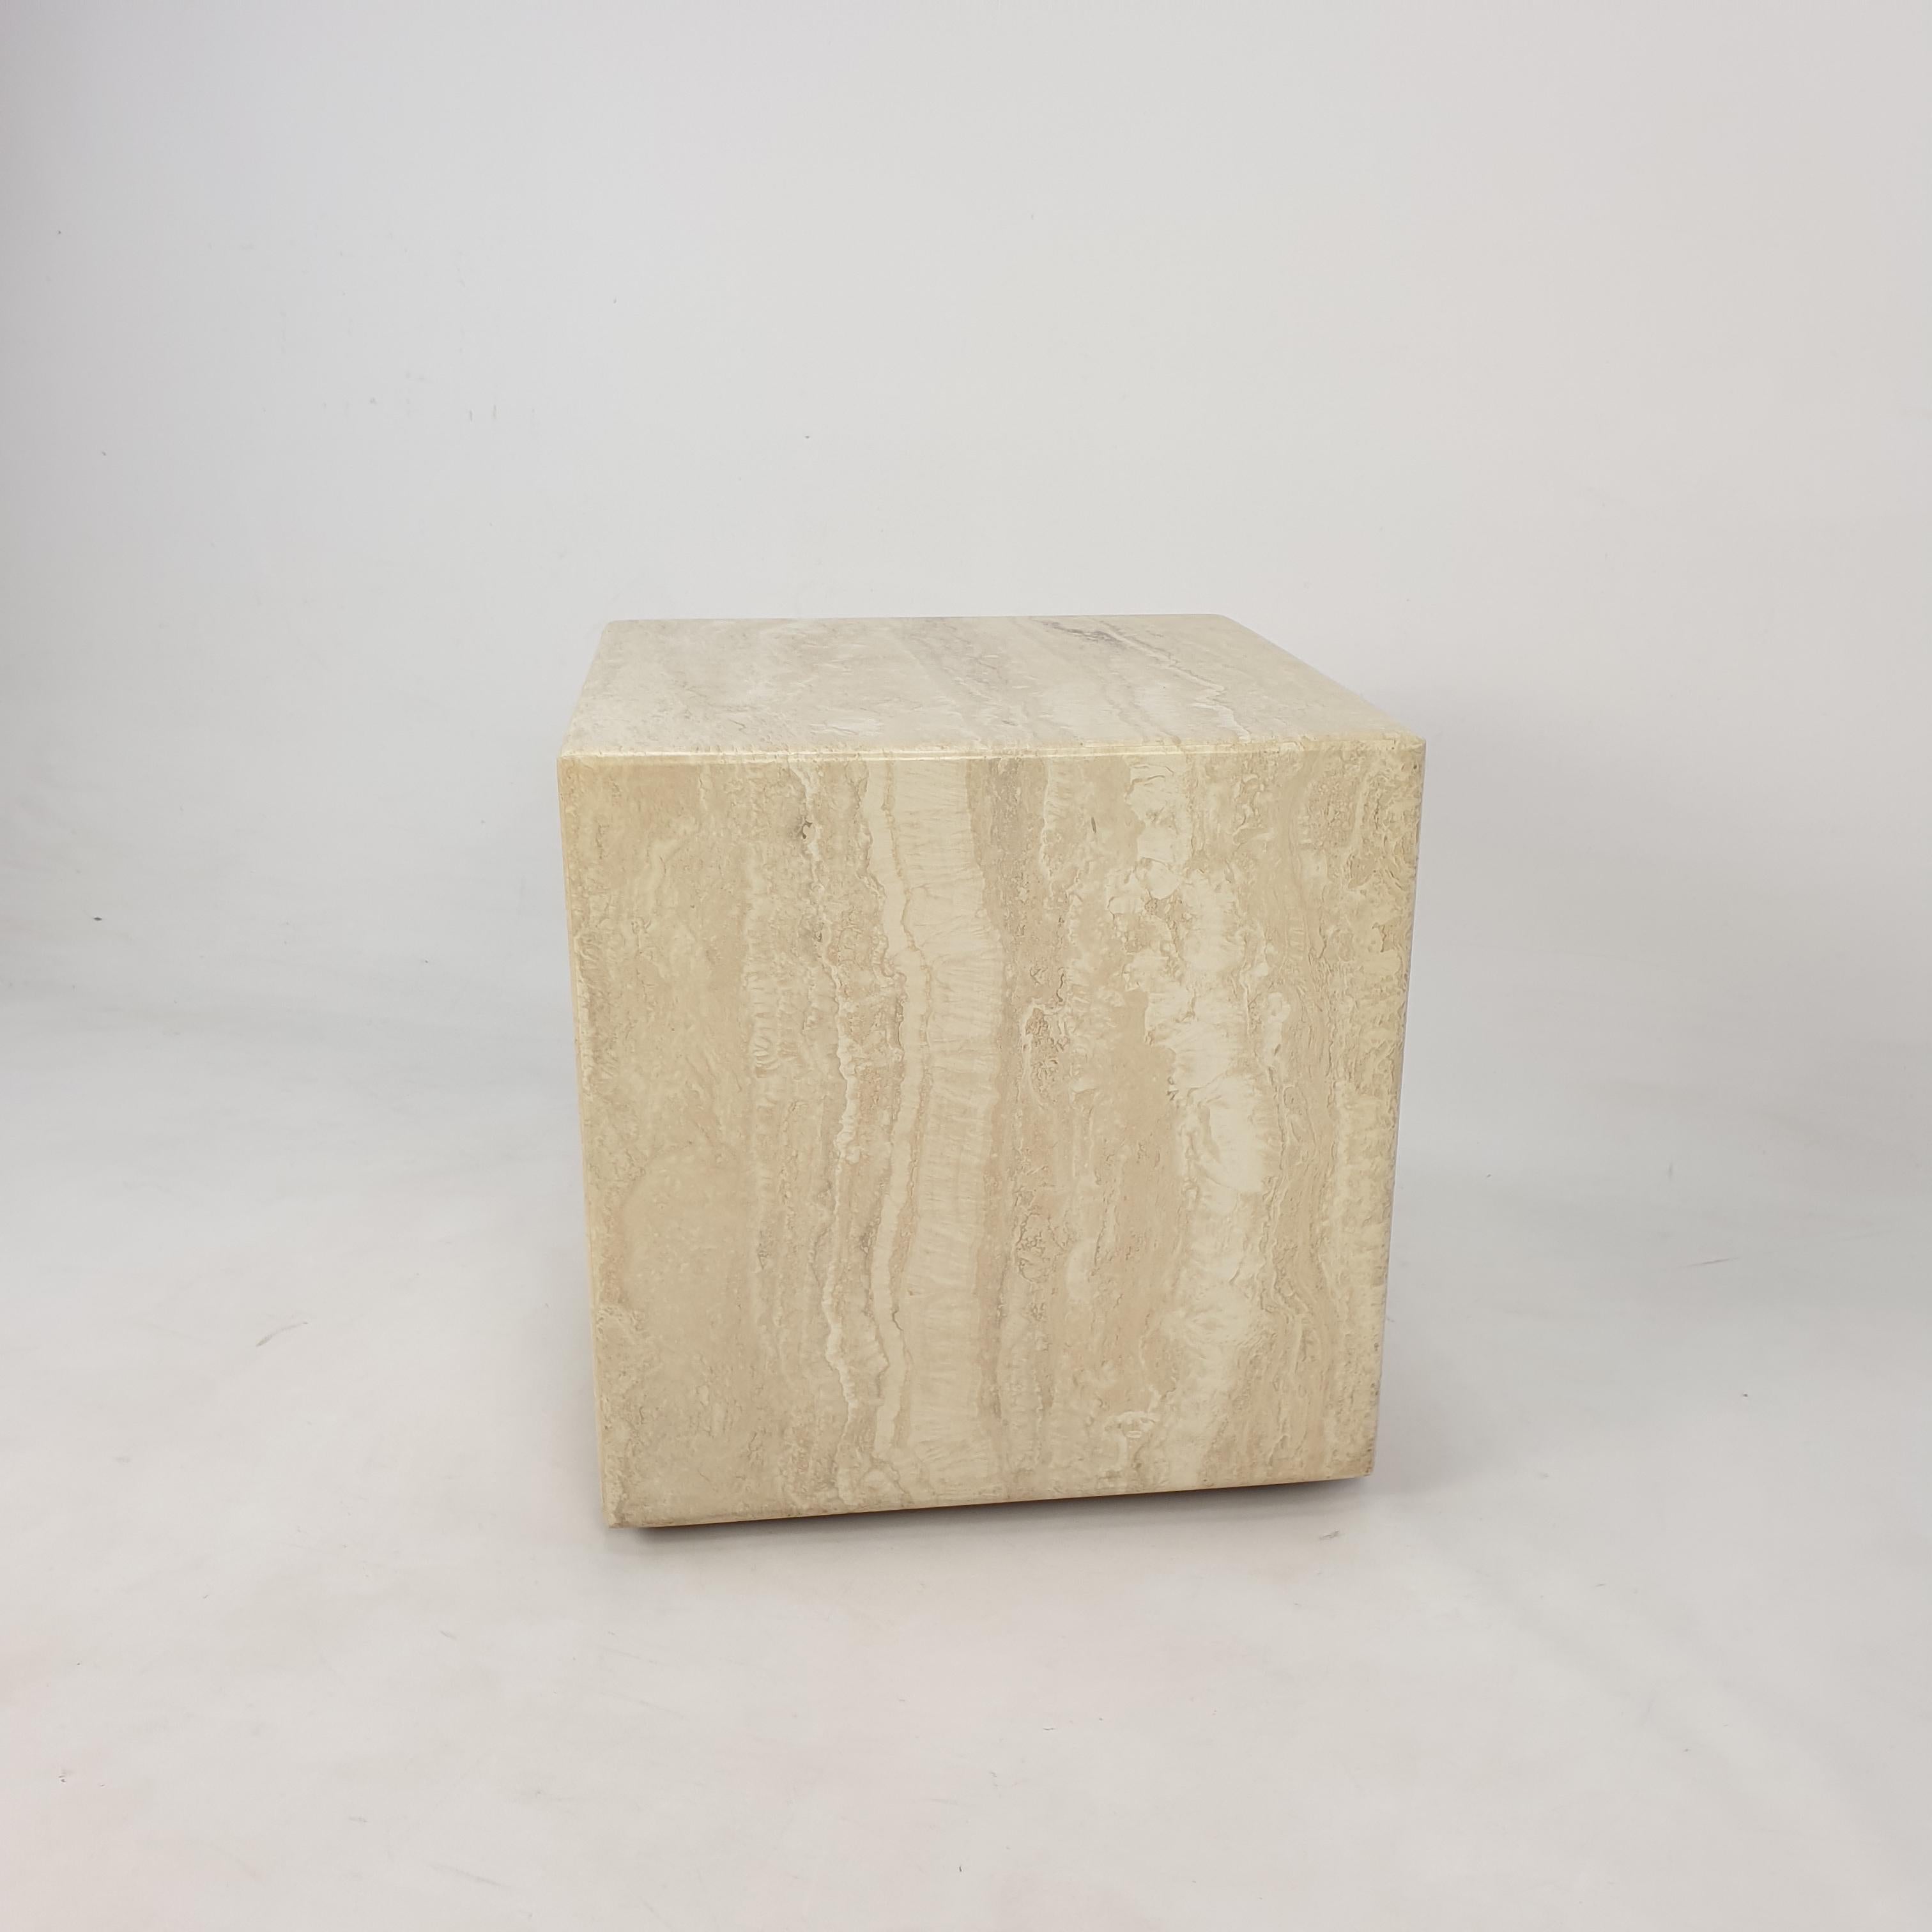 Very nice Italian side table handcrafted out of travertine, fabricated in the early 80's.

The wheels under the bottom makes it easy to move.